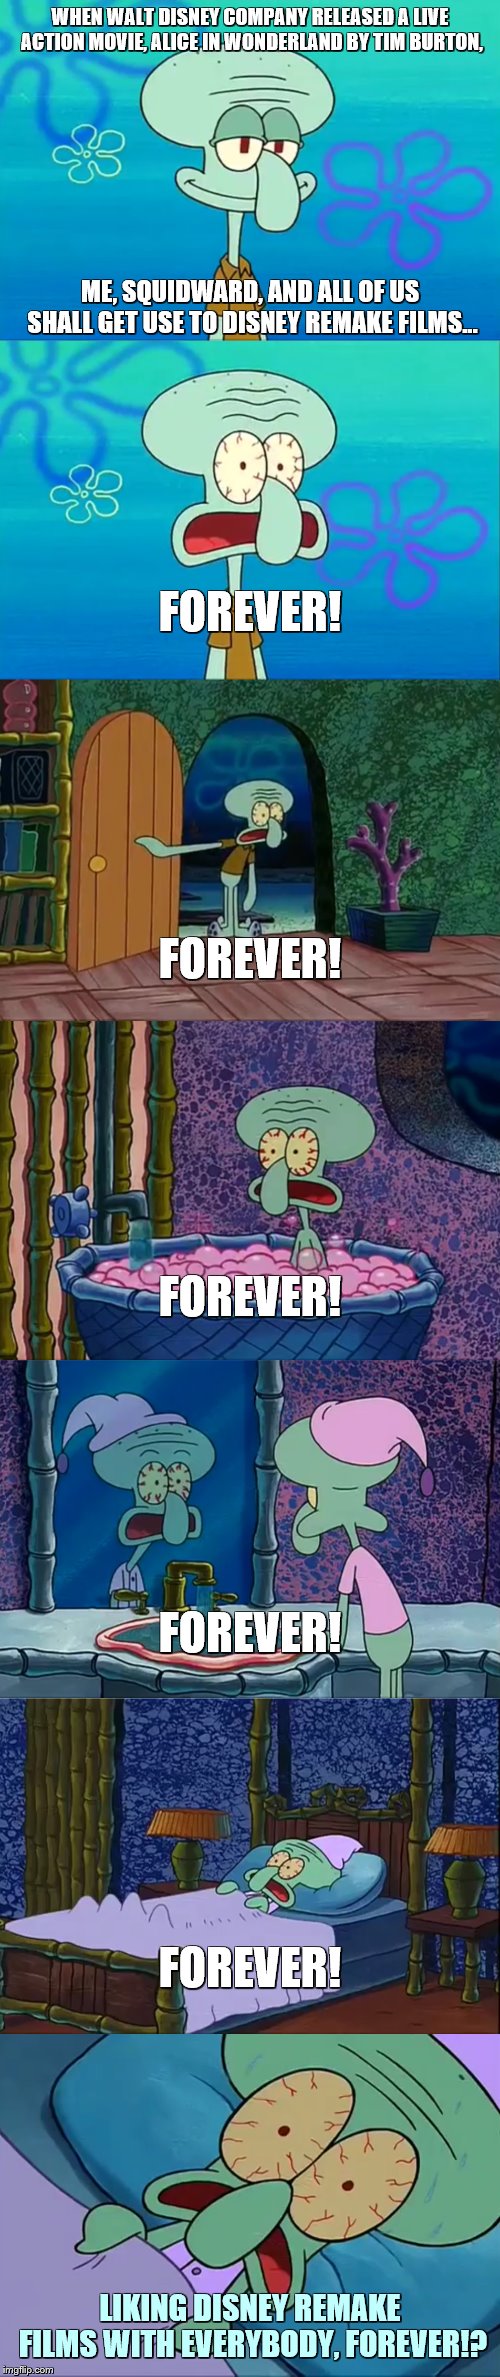 Disney Remakes Forever | WHEN WALT DISNEY COMPANY RELEASED A LIVE ACTION MOVIE, ALICE IN WONDERLAND BY TIM BURTON, ME, SQUIDWARD, AND ALL OF US SHALL GET USE TO DISNEY REMAKE FILMS... FOREVER! FOREVER! FOREVER! FOREVER! FOREVER! LIKING DISNEY REMAKE FILMS WITH EVERYBODY, FOREVER!? | image tagged in disney,squidward | made w/ Imgflip meme maker